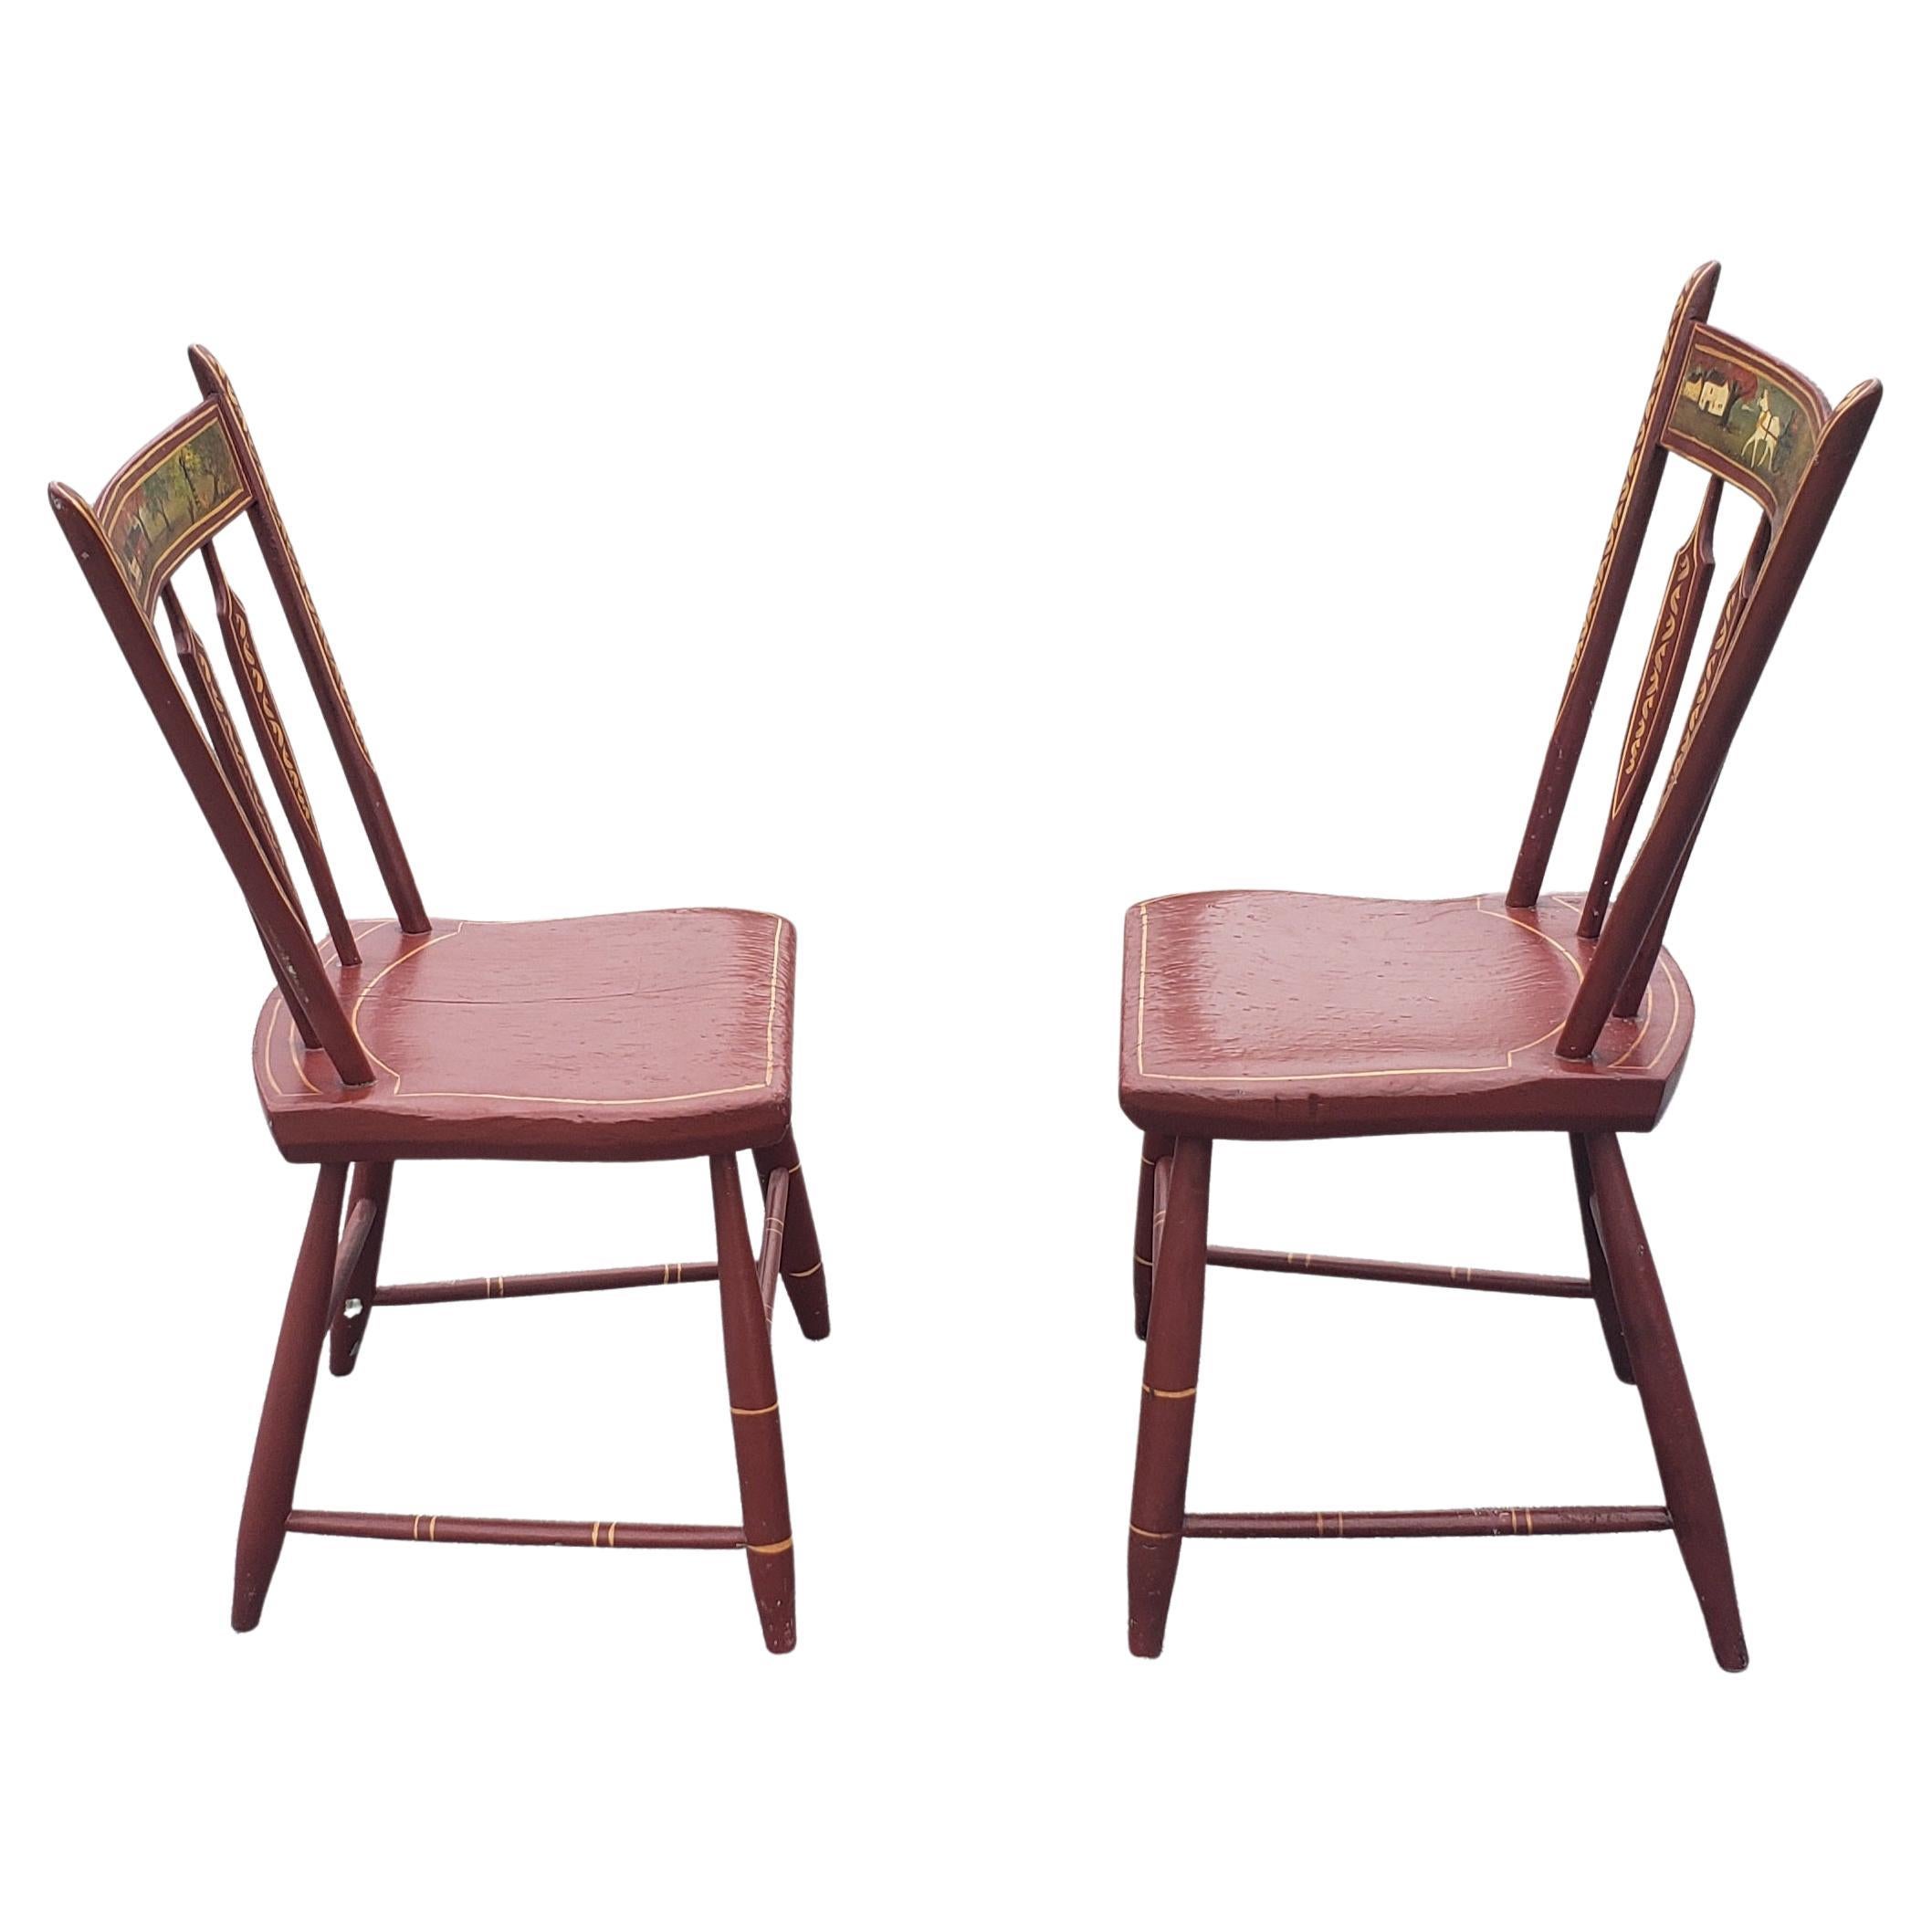 Hardwood Pair of 19th Century. Signed Hand Painted and Decorated Plank Seat Side Chairs For Sale